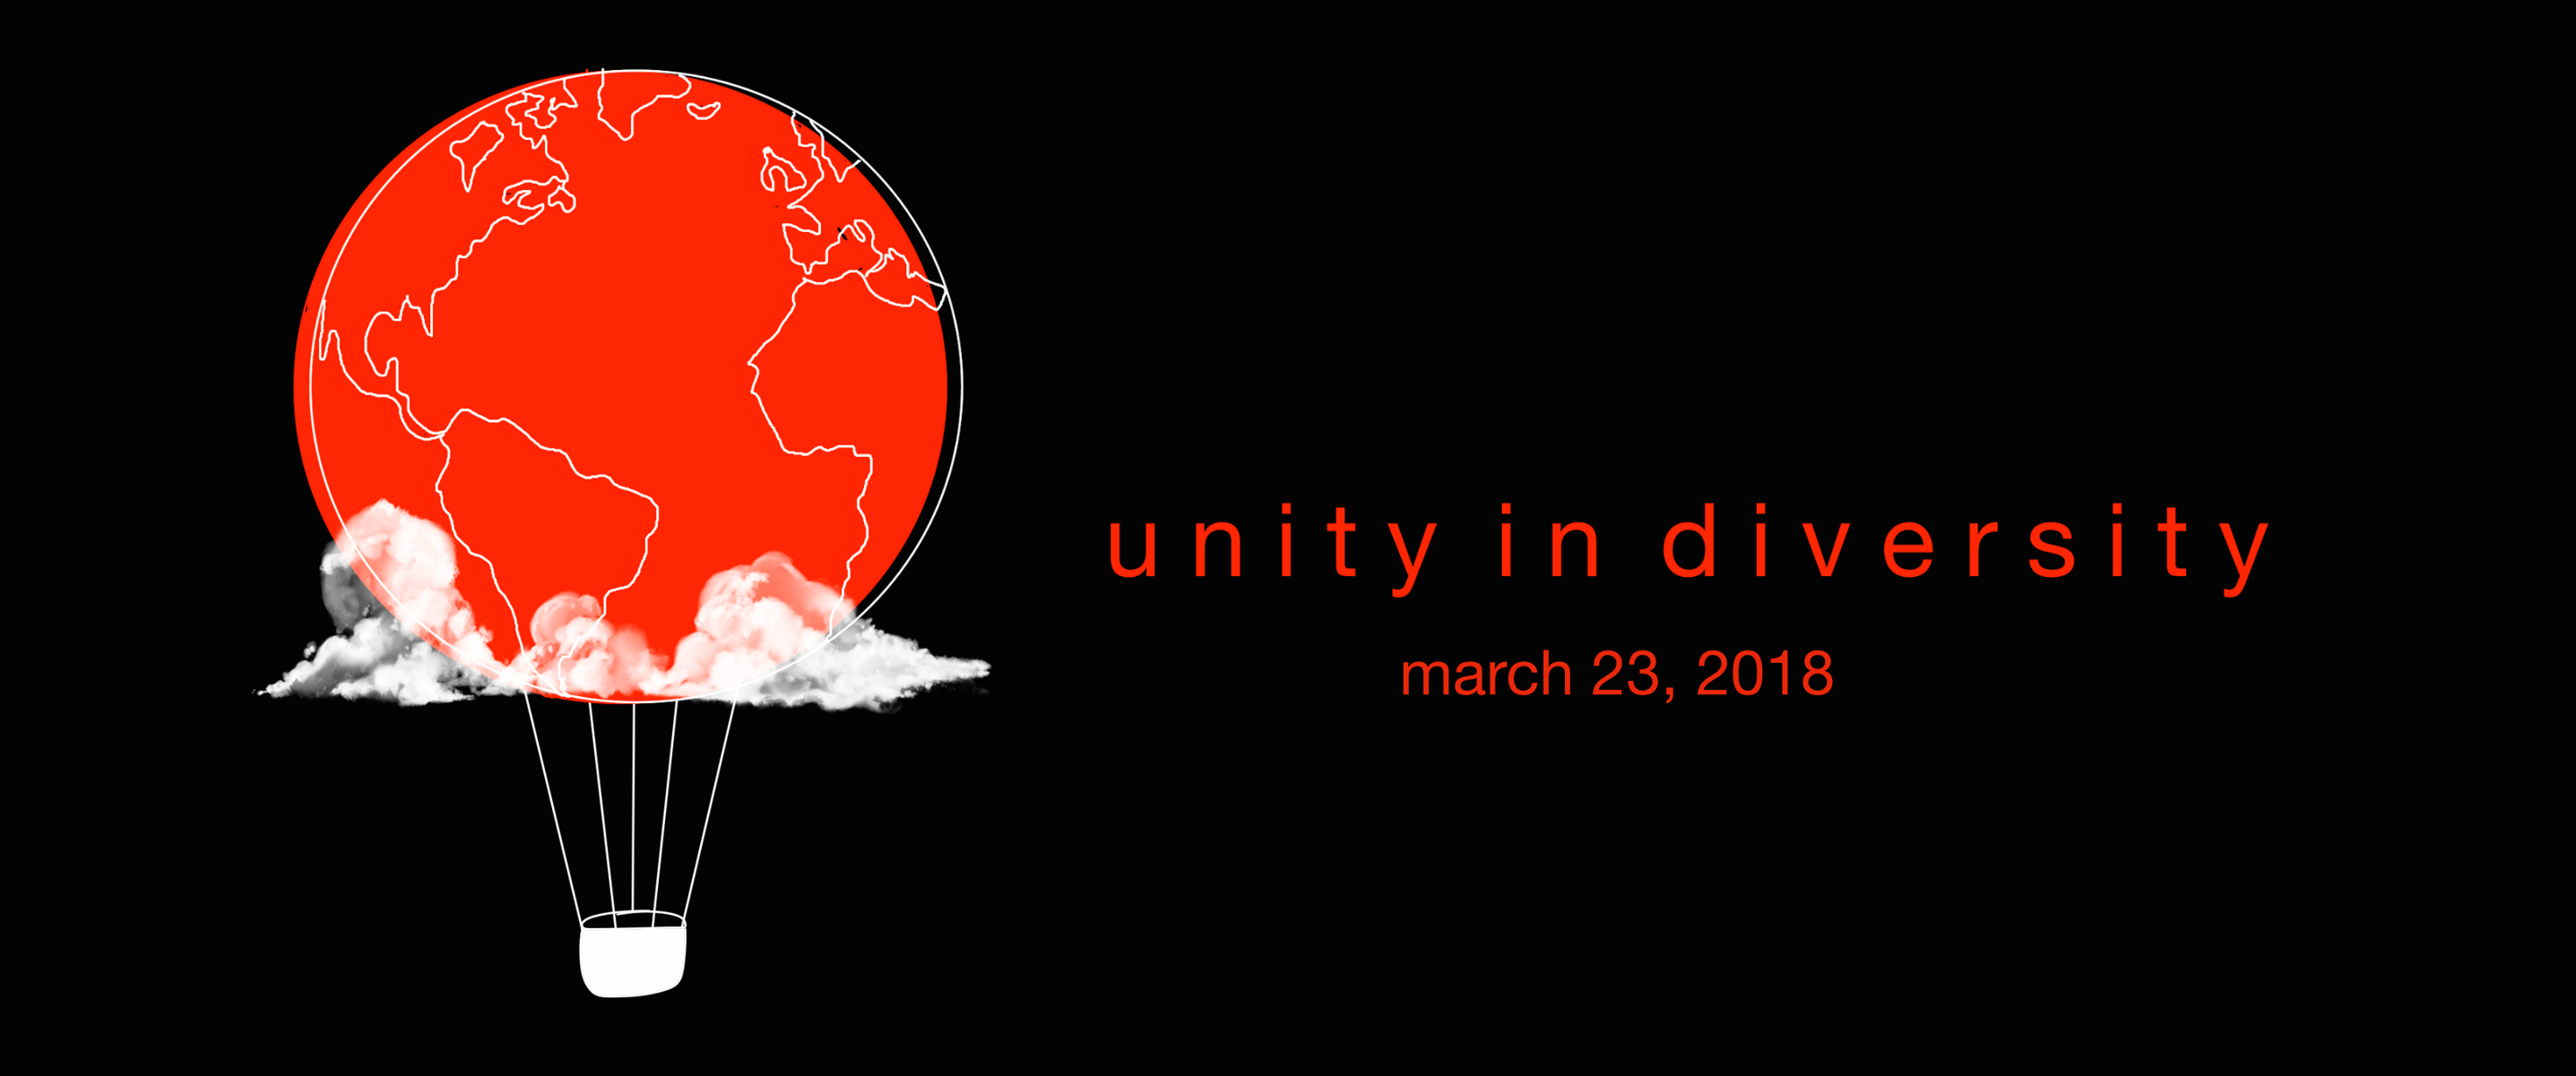 TEDxFSU: Unity in Diversity, March 23, 2018